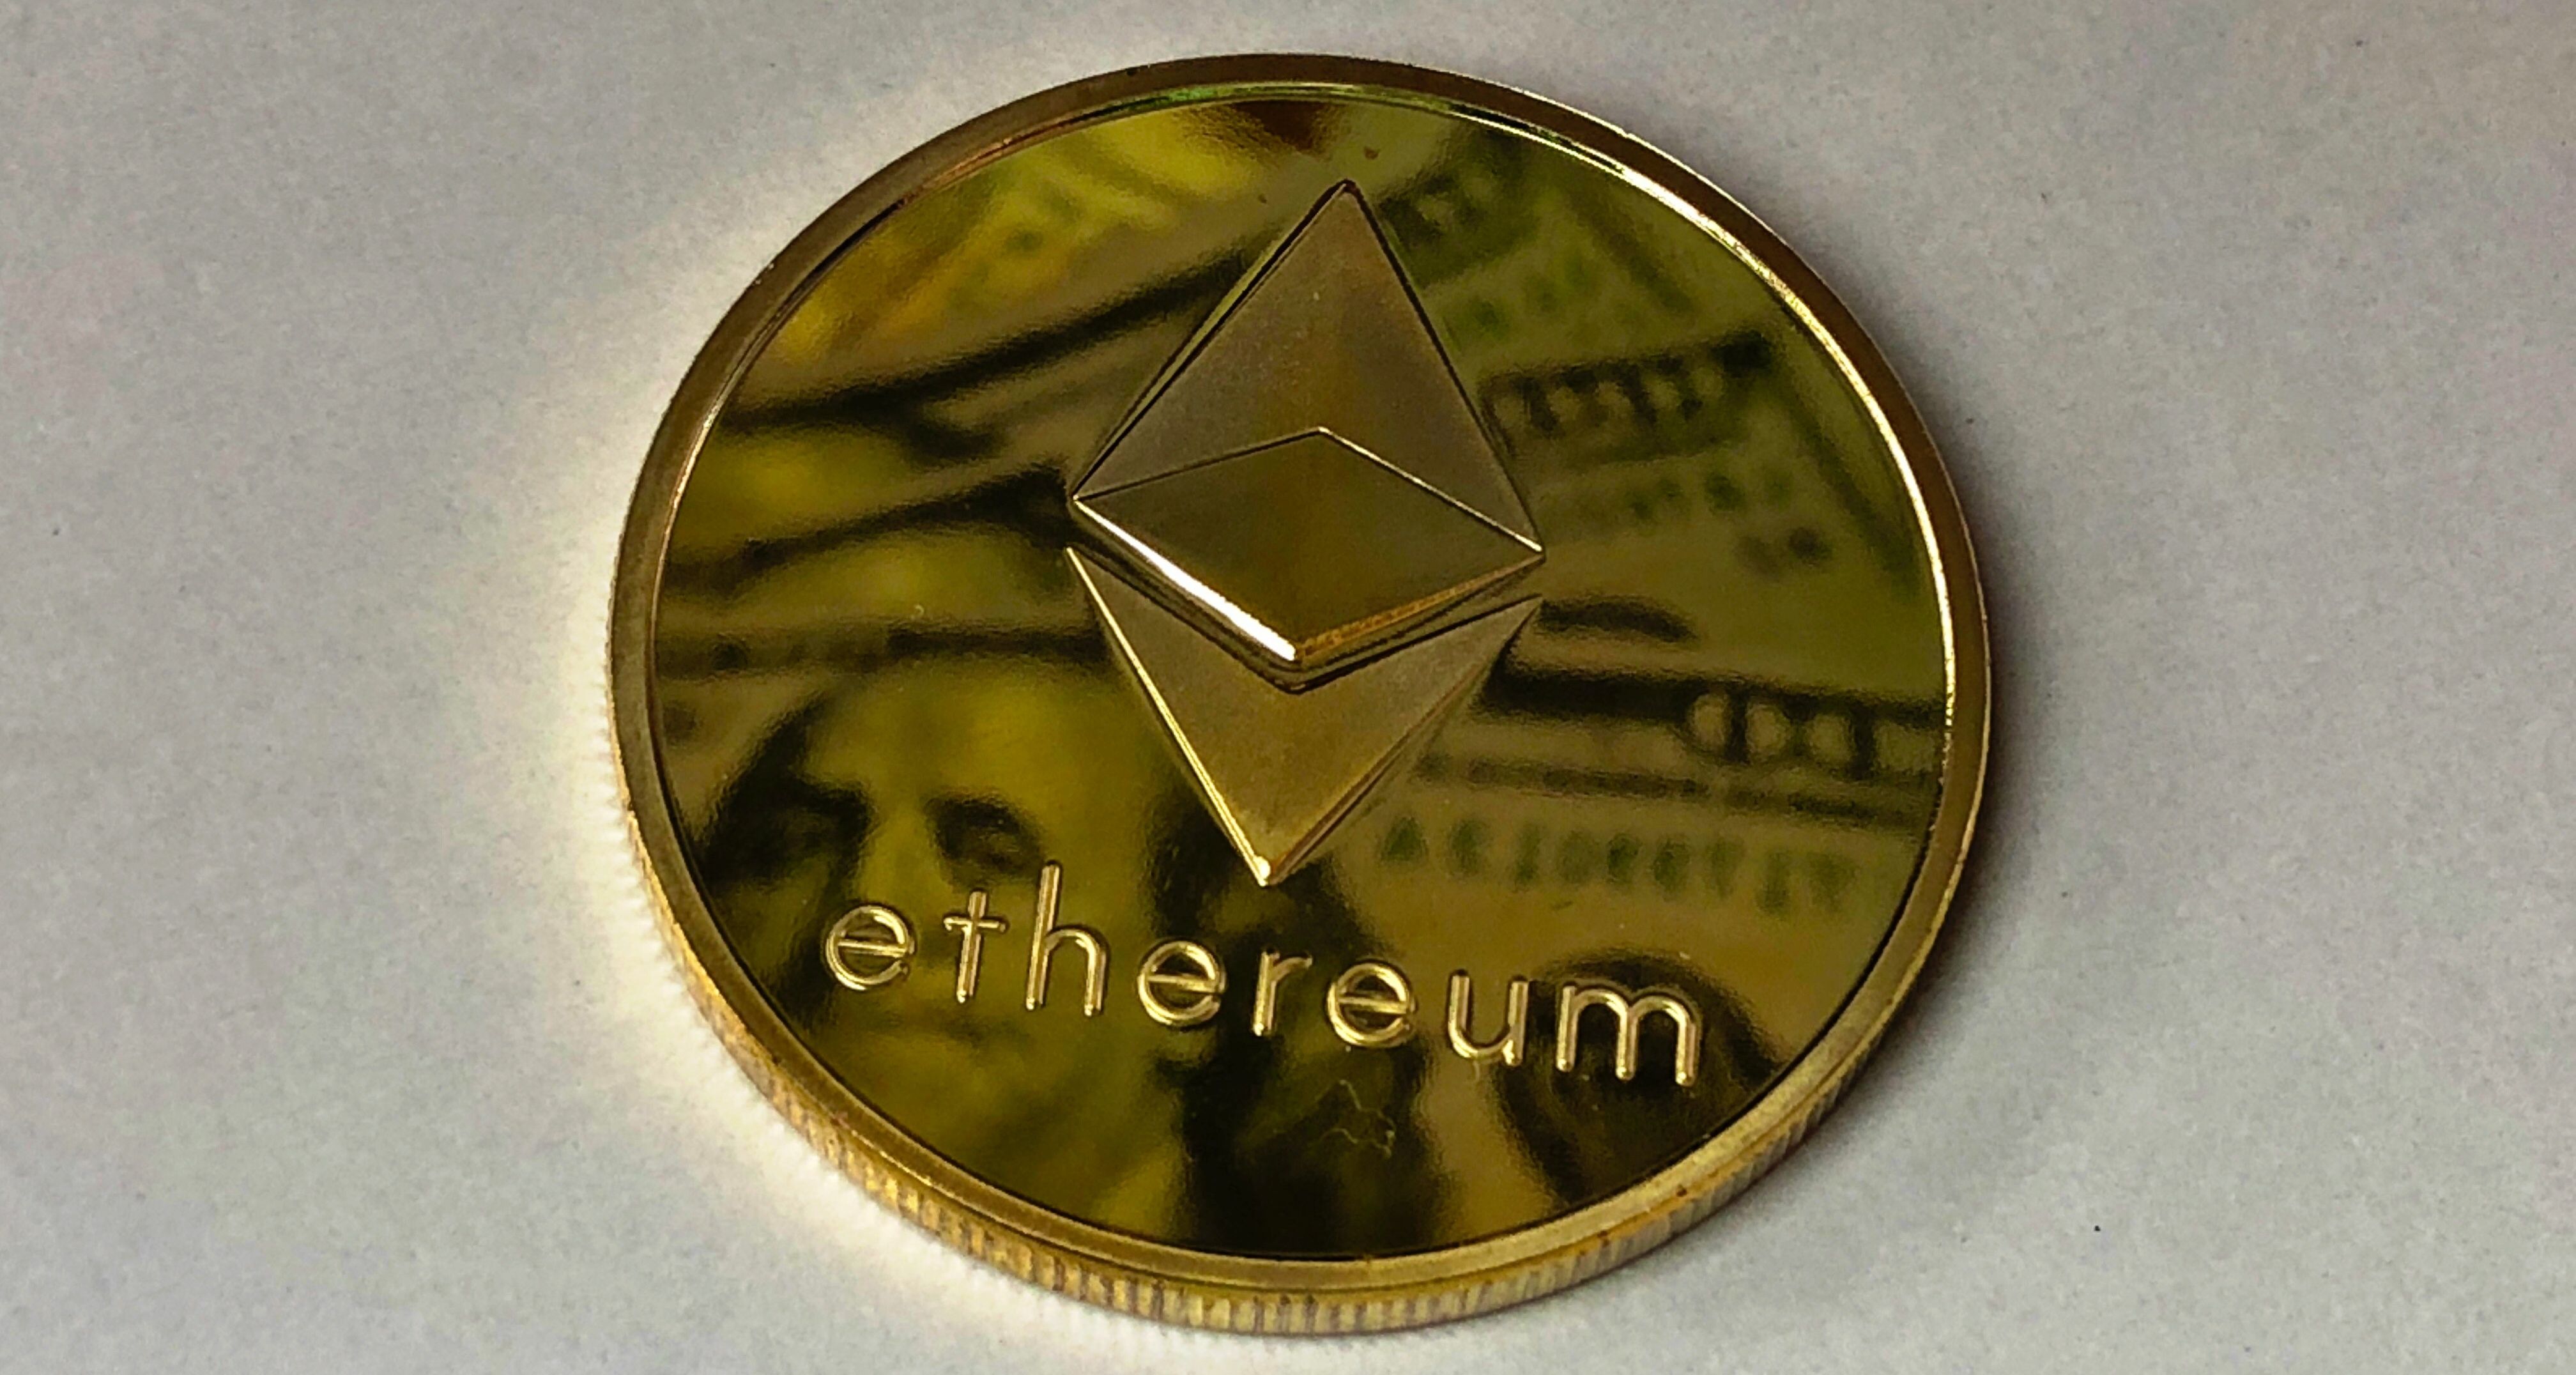 ethereum coin on table